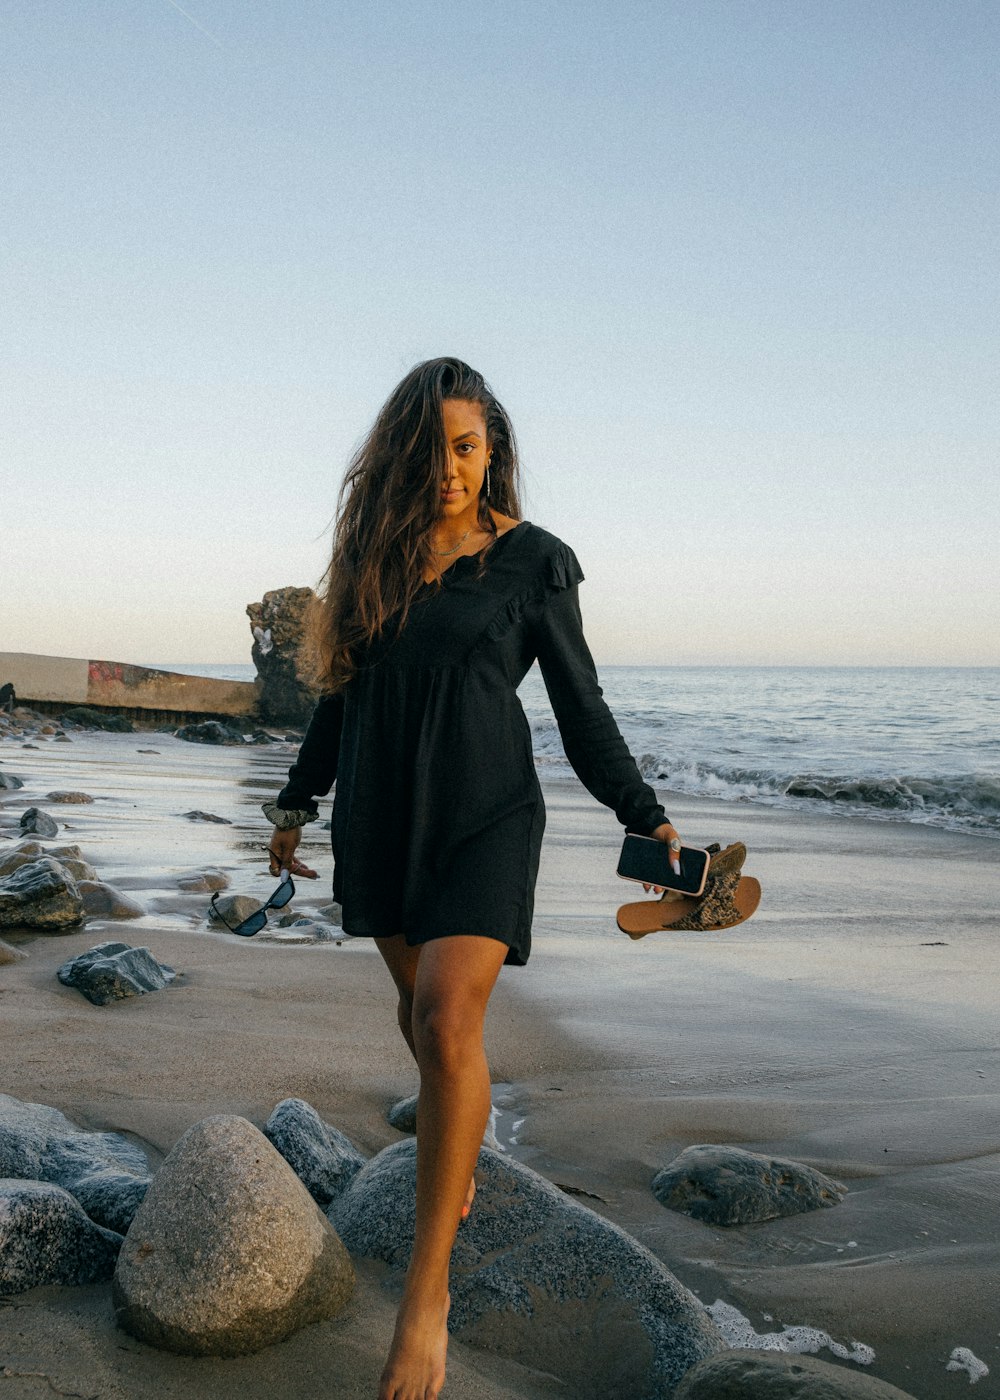 woman in black long sleeve dress holding brown acoustic guitar standing on gray rock near body